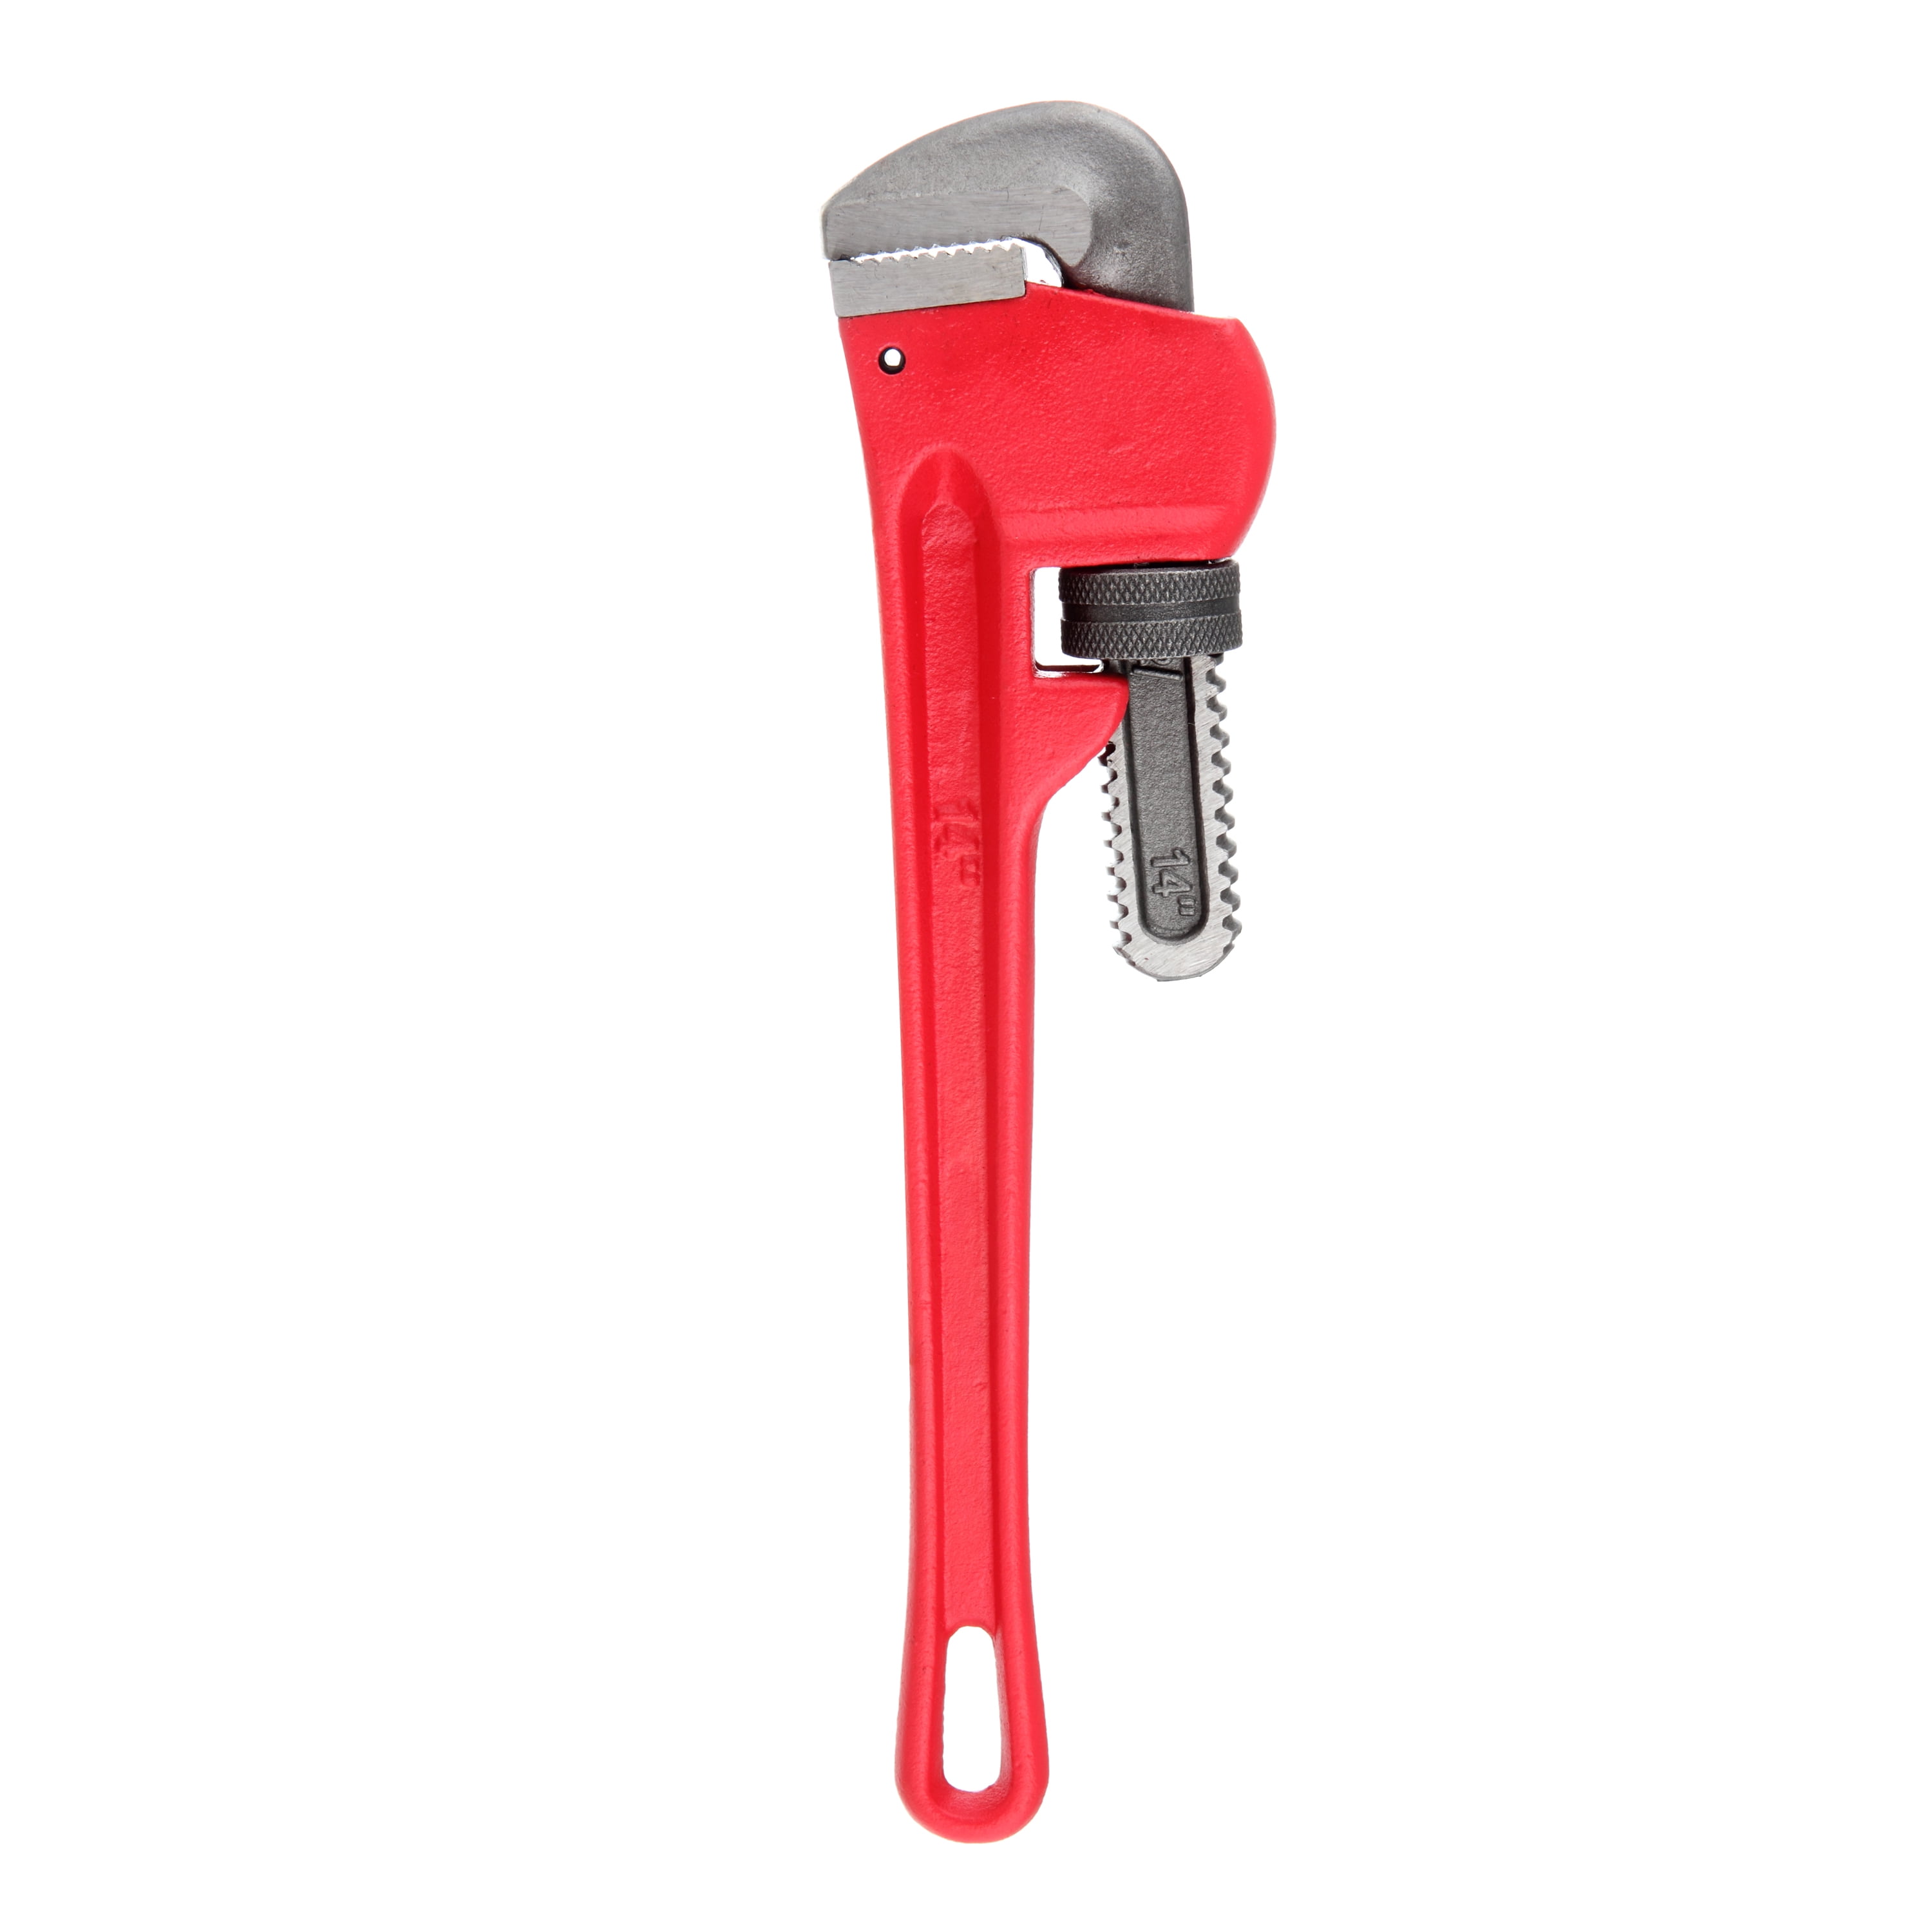 Hardware Tools Practical Household 3Pcs Heavy Duty Pipe Wrench Adjustable Set 14inch 18inch 24inch Monkey Soft Grip. 